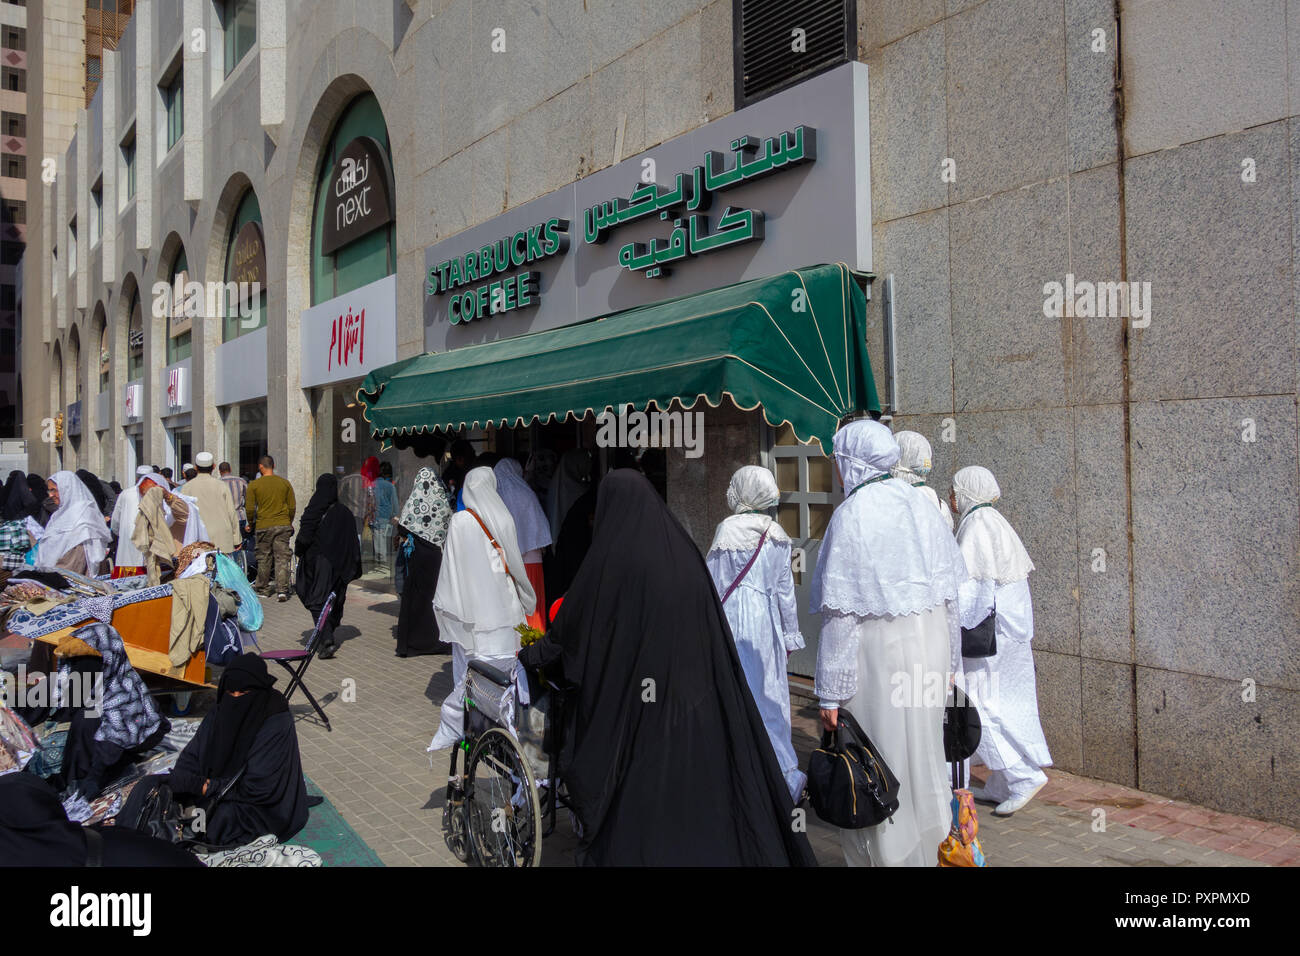 MEDINA, SAUDI ARABIA-CIRCA 2014: Starbucks Coffee outlet opens for business. The outlet located just outside Nabawi mosque. Stock Photo